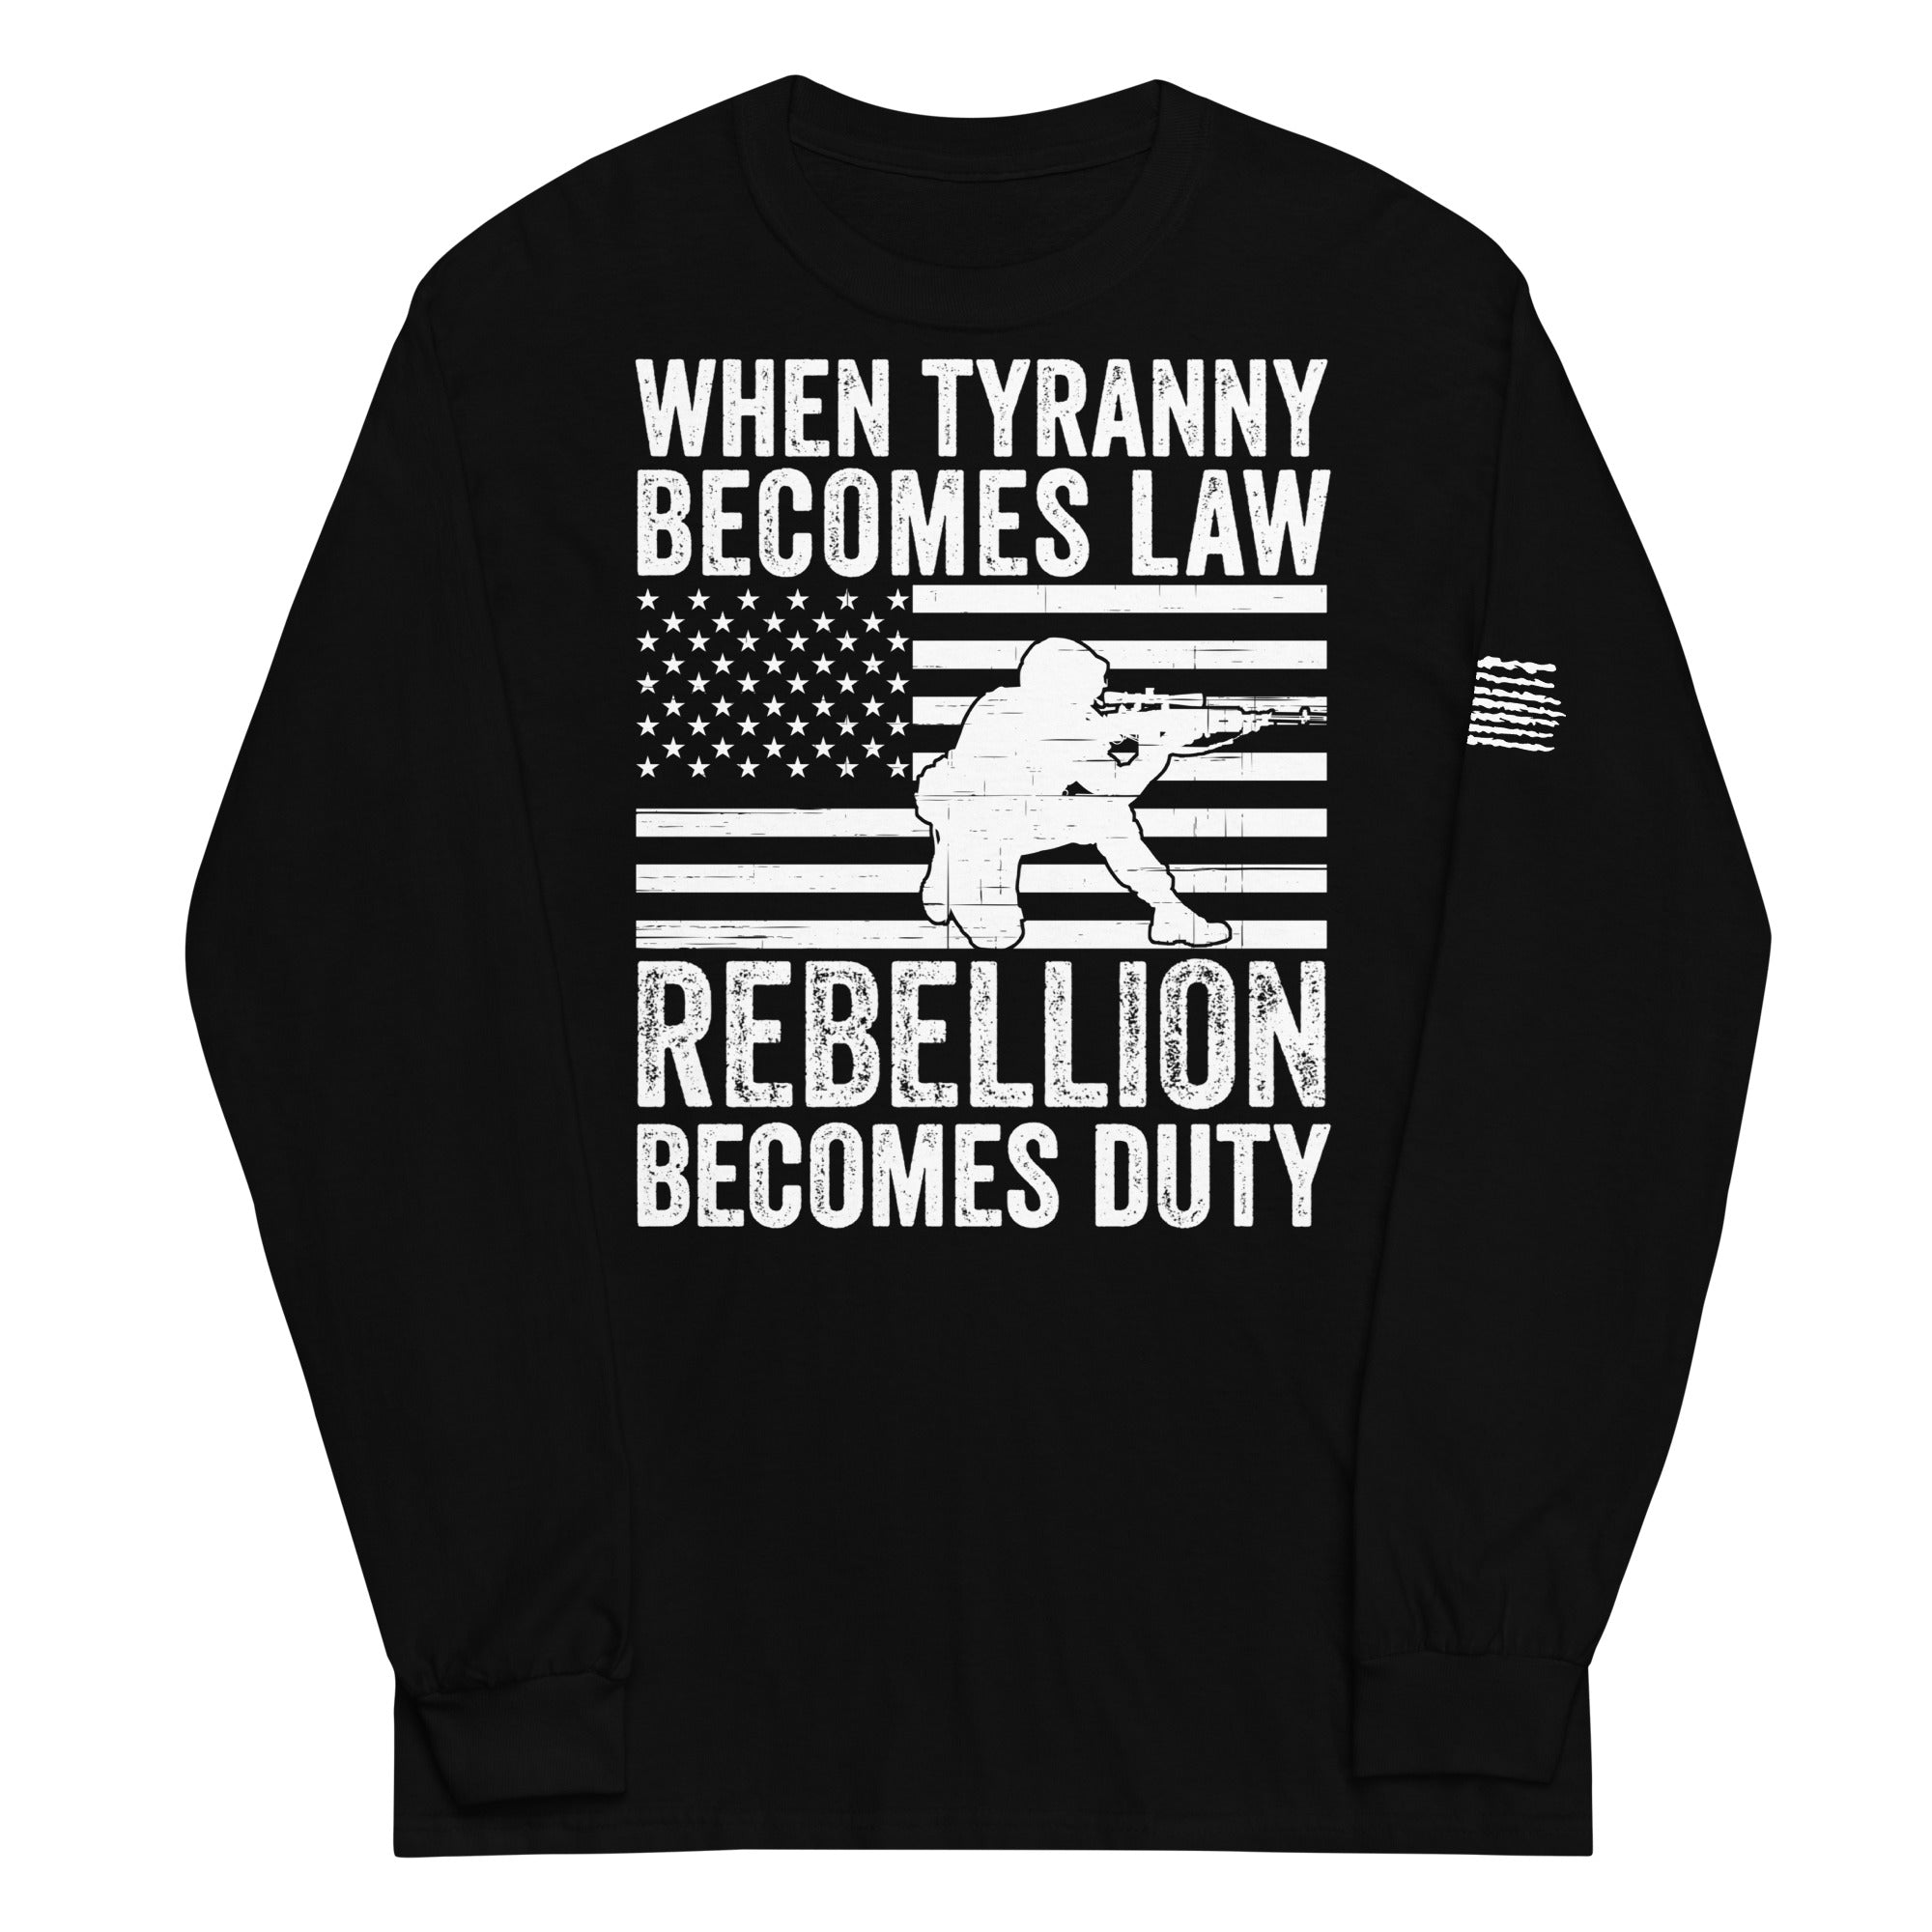 When Tyranny Becomes Law Rebellion Becomes Duty, 1776 Long Sleeve Shirt, Thomas Jefferson Tee, Political Shirts, 4th of July Patriotic Shirt